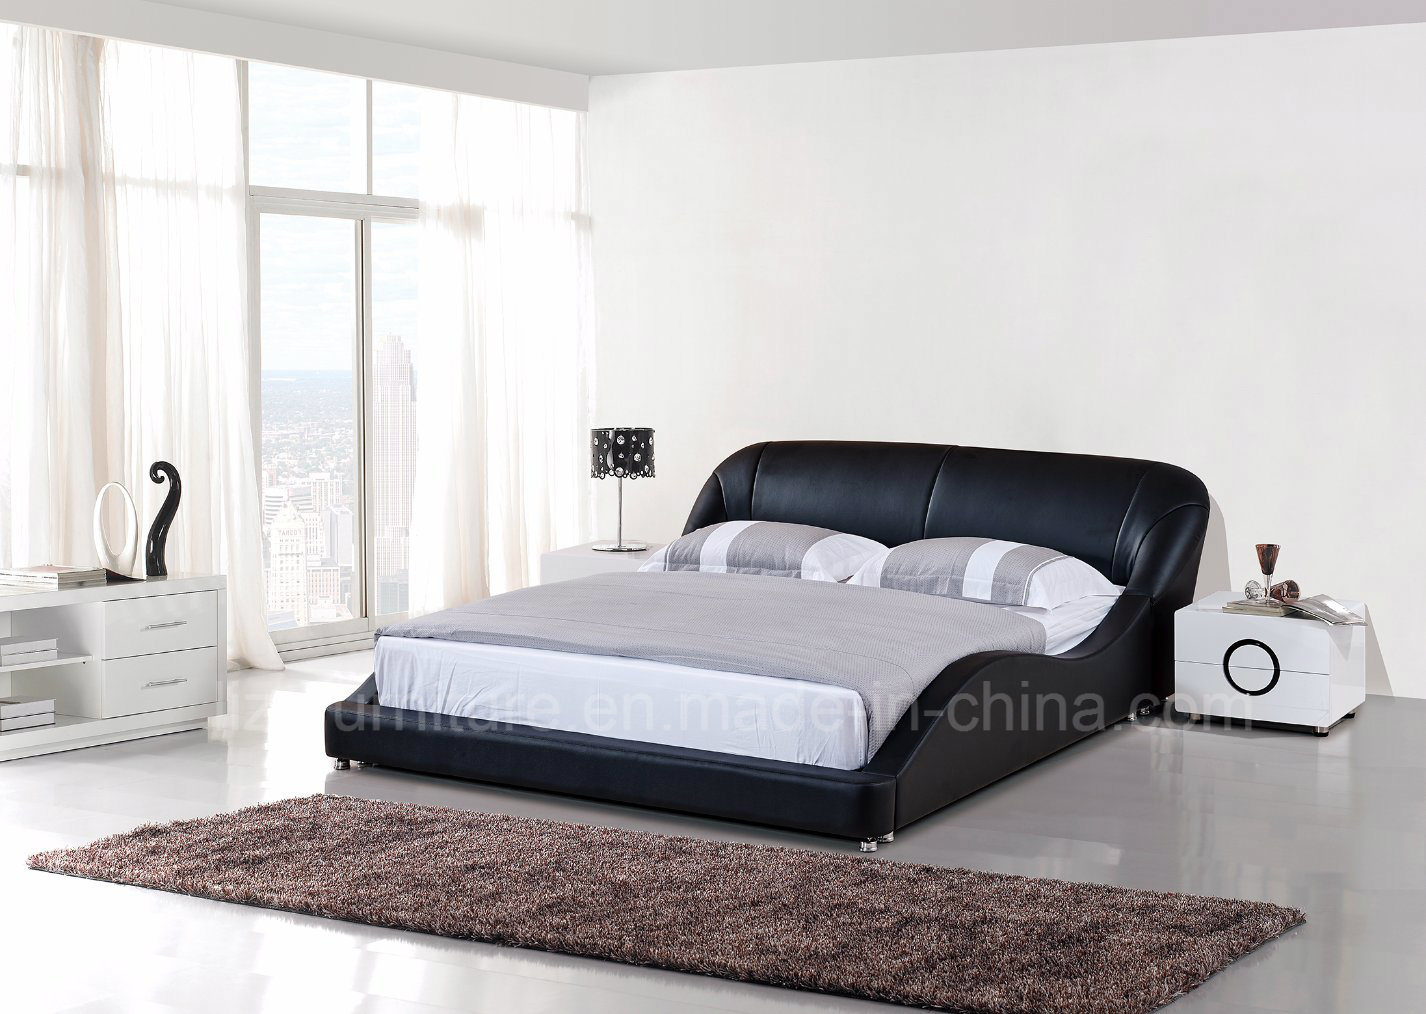 Queen-Size Beds Hotel Furniture Leather Bed